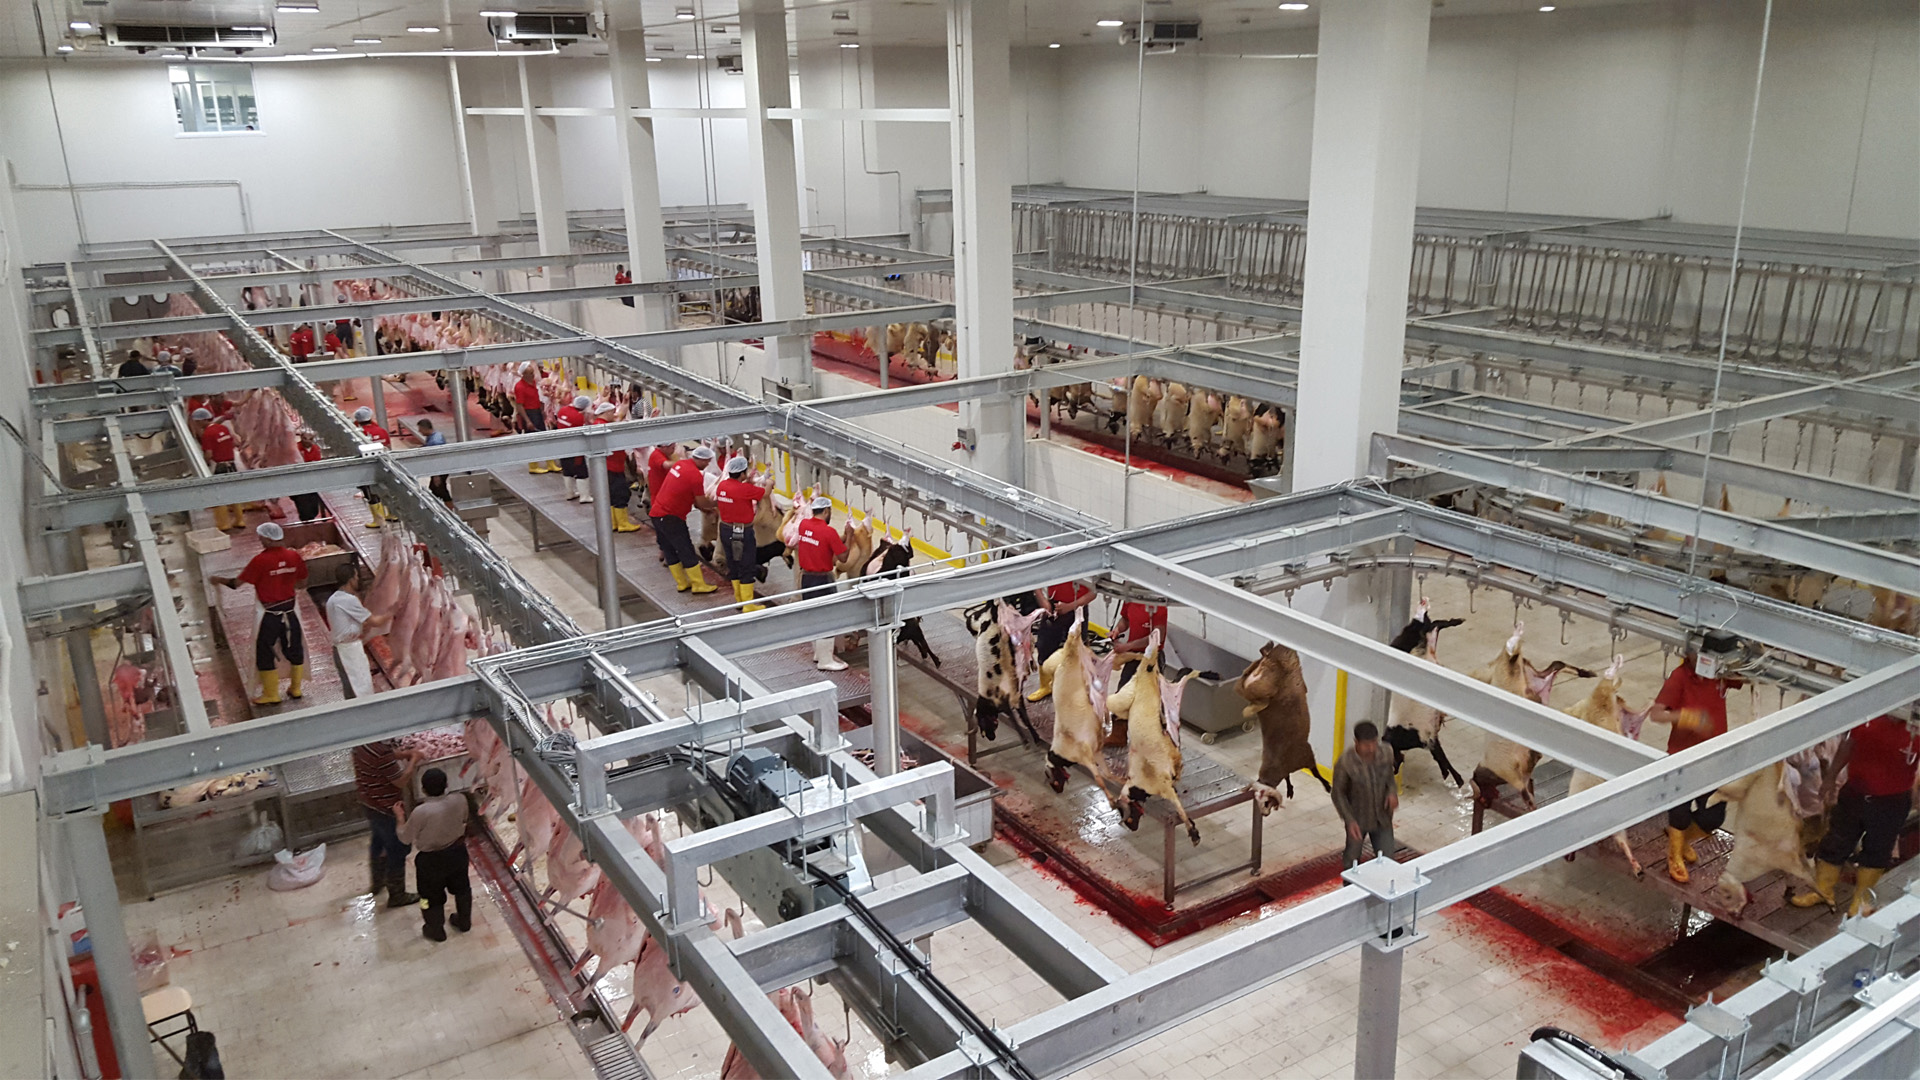 Slaughterhouse and Meat Processing Facilities